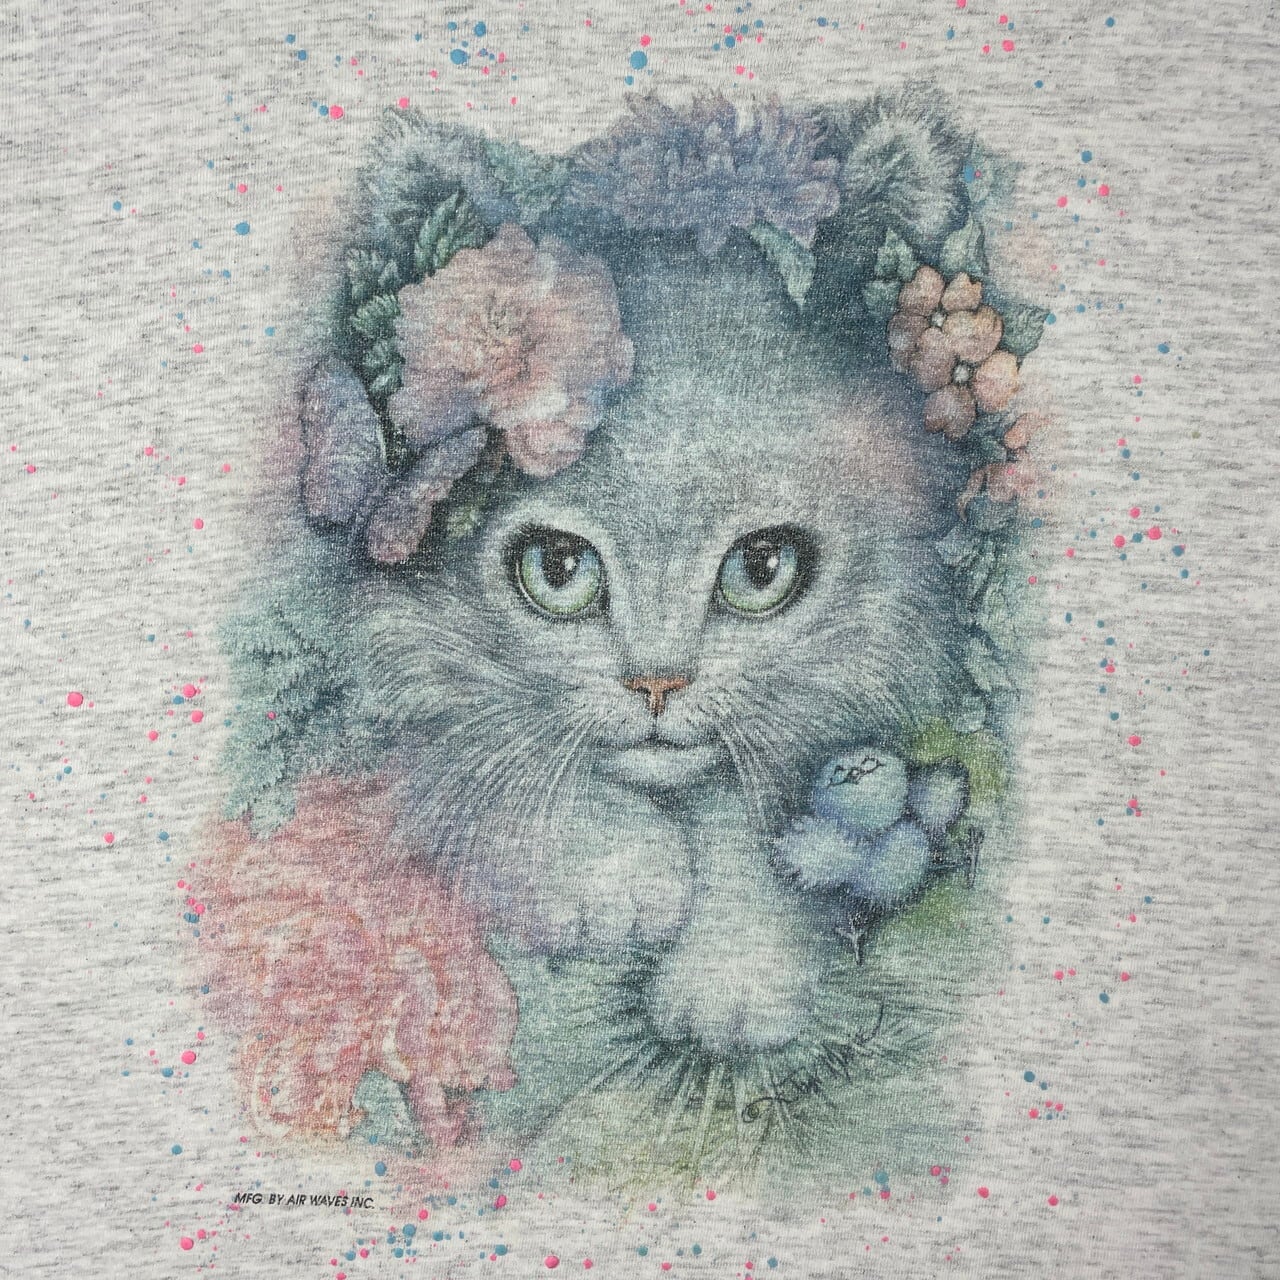 ★90s vintage usa製 アート Tシャツ シングルステッチ 絵画